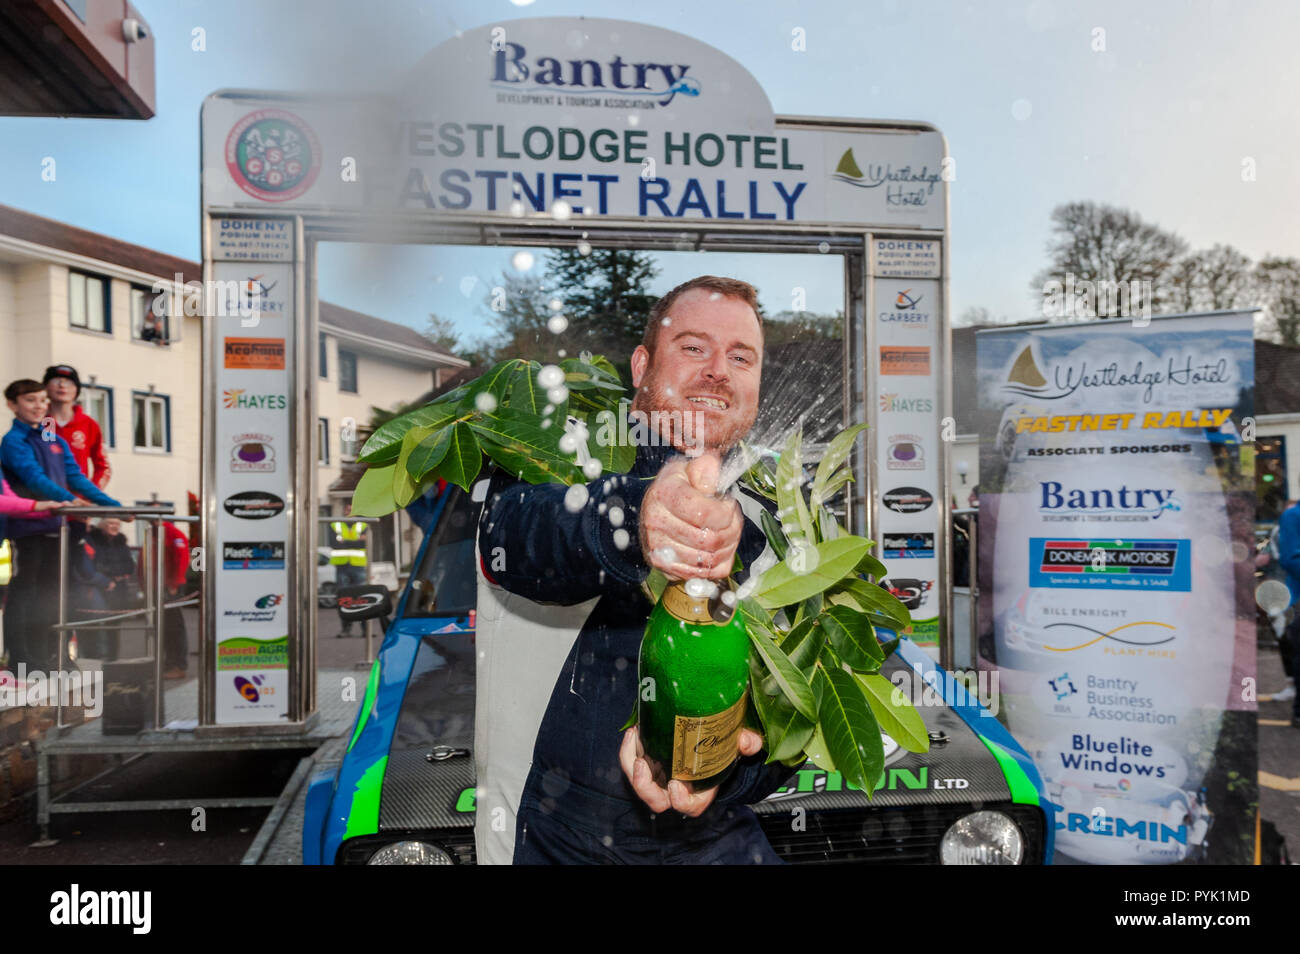 Bantry, West Cork, Ireland. 28th Oct, 2018. Damien Tourish, the winning rally driver, sprays the crowd with champagne at the end of the 2018 Fastnet Rally. Credit: Andy Gibson/Alamy Live News. Stock Photo